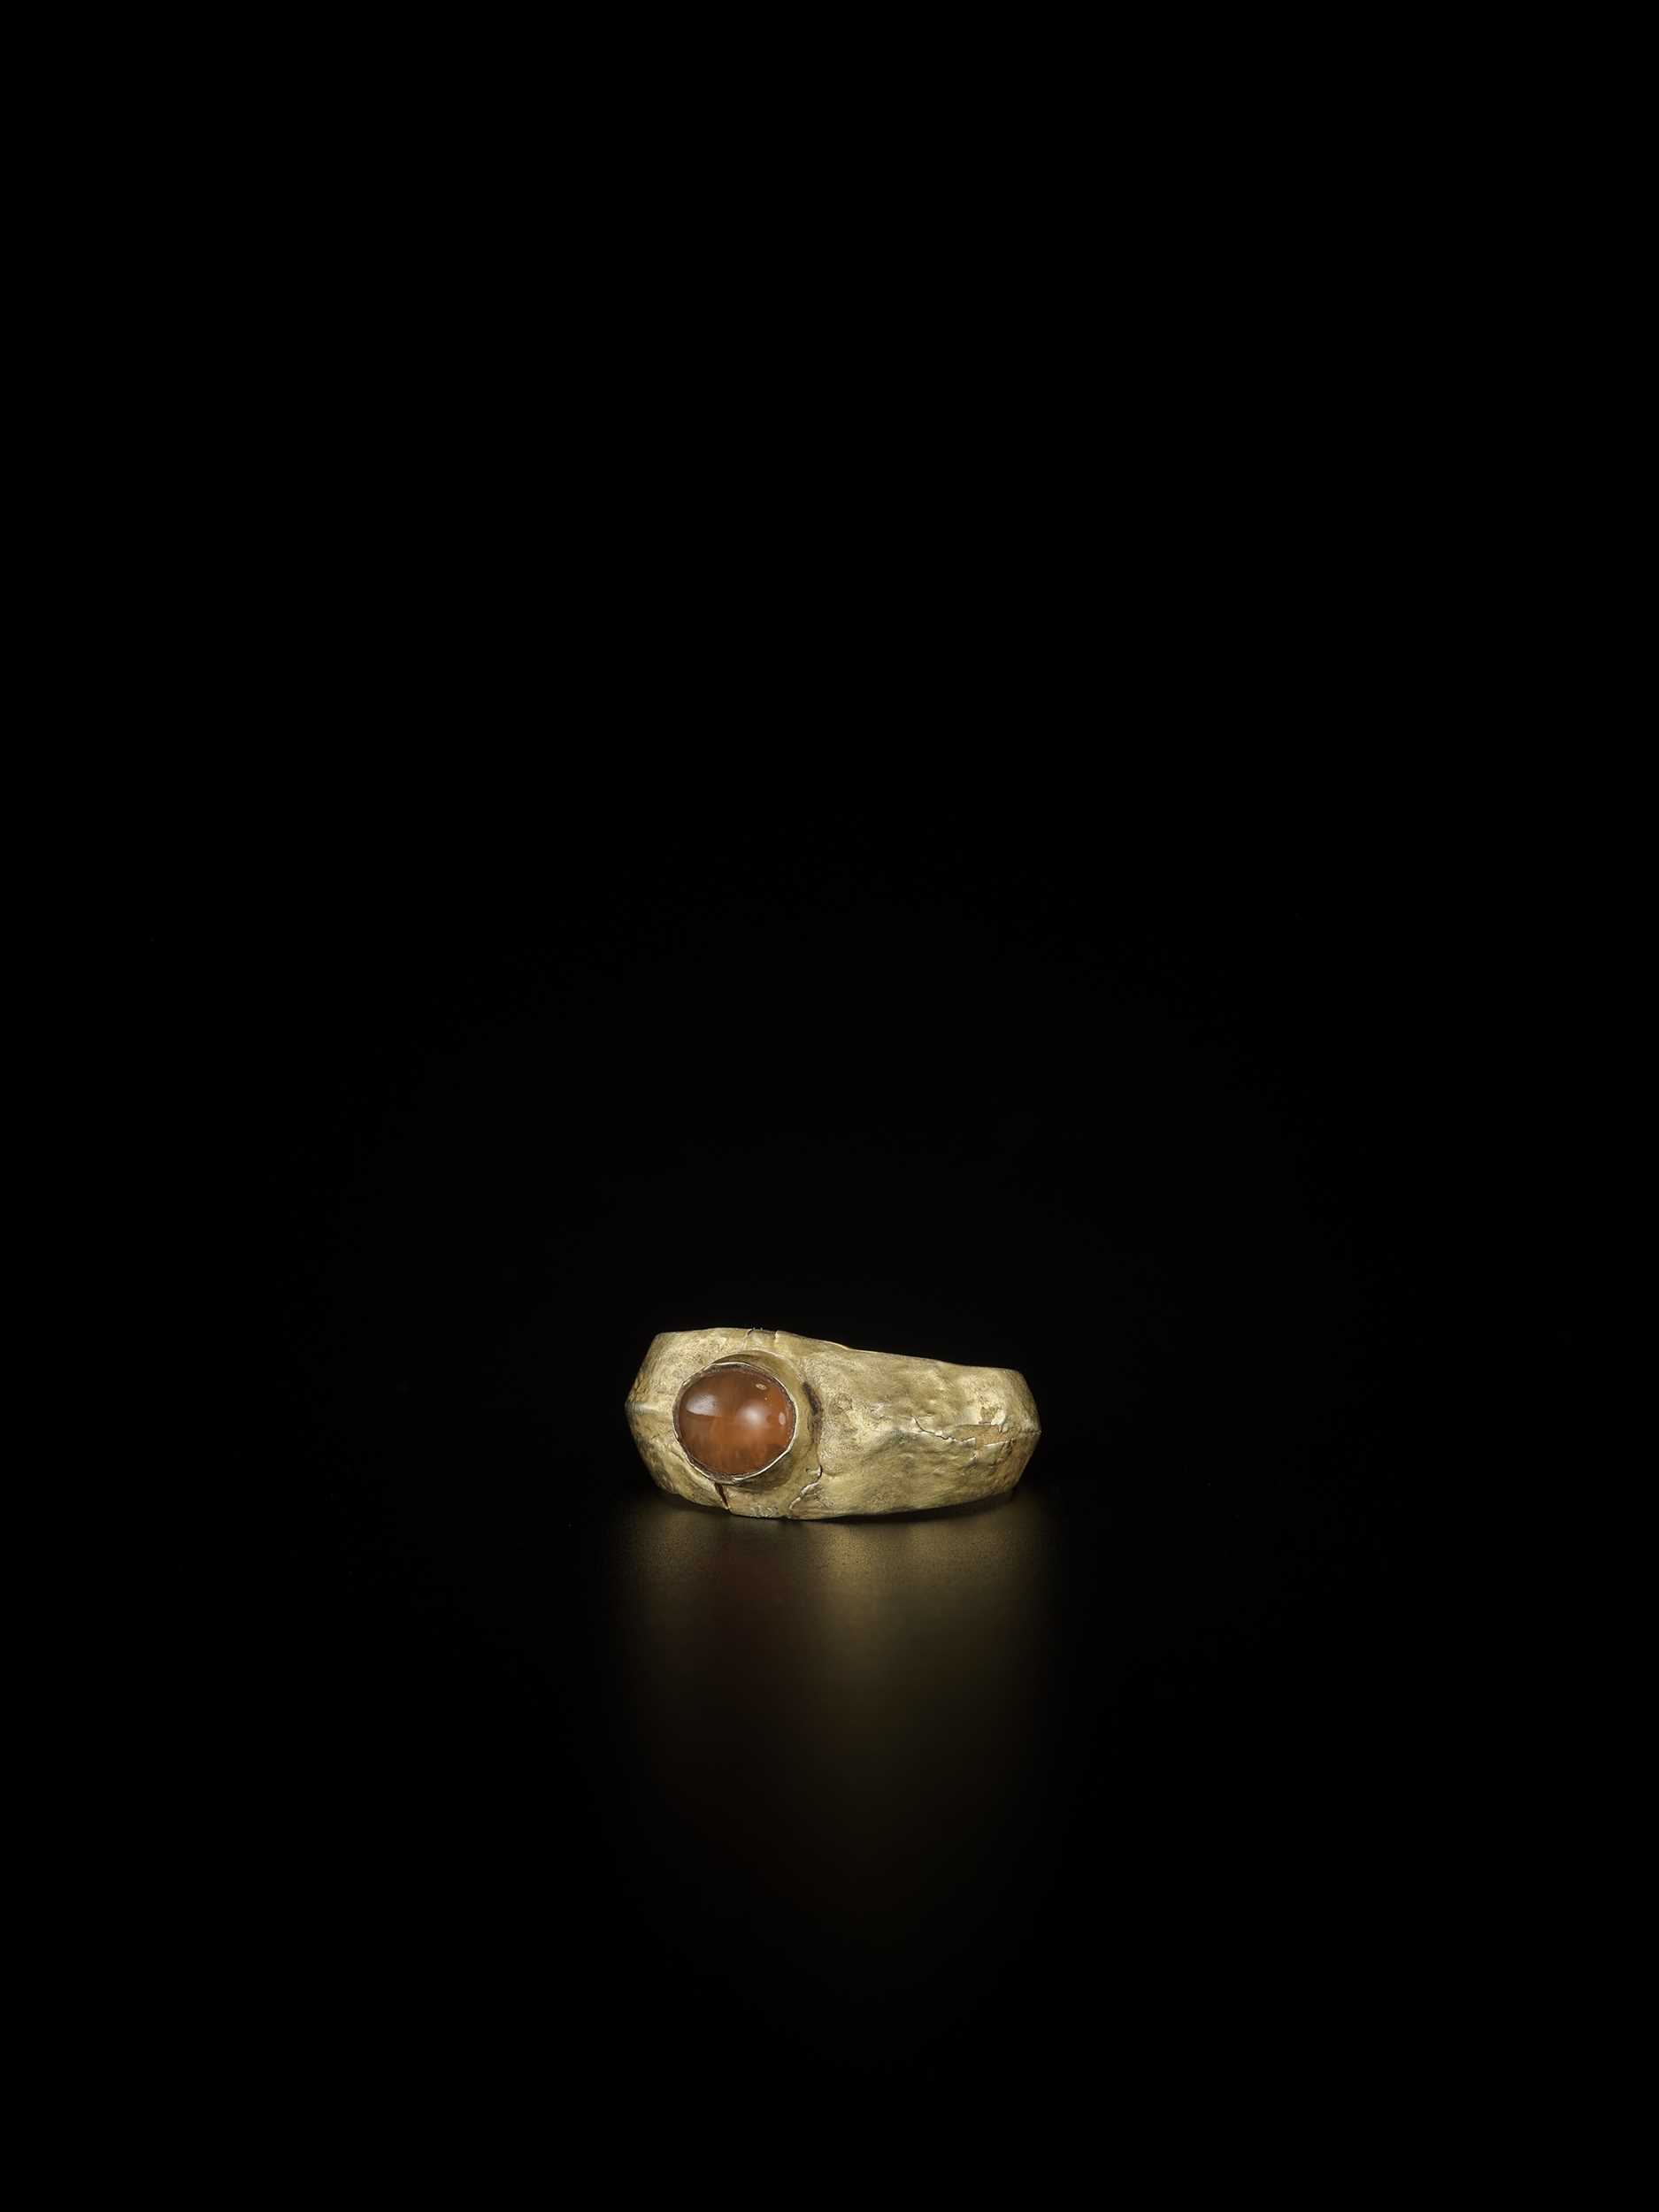 Lot 1261 - A GOLD RING WITH A CARNELIAN, 5TH-1ST CENTURY BC